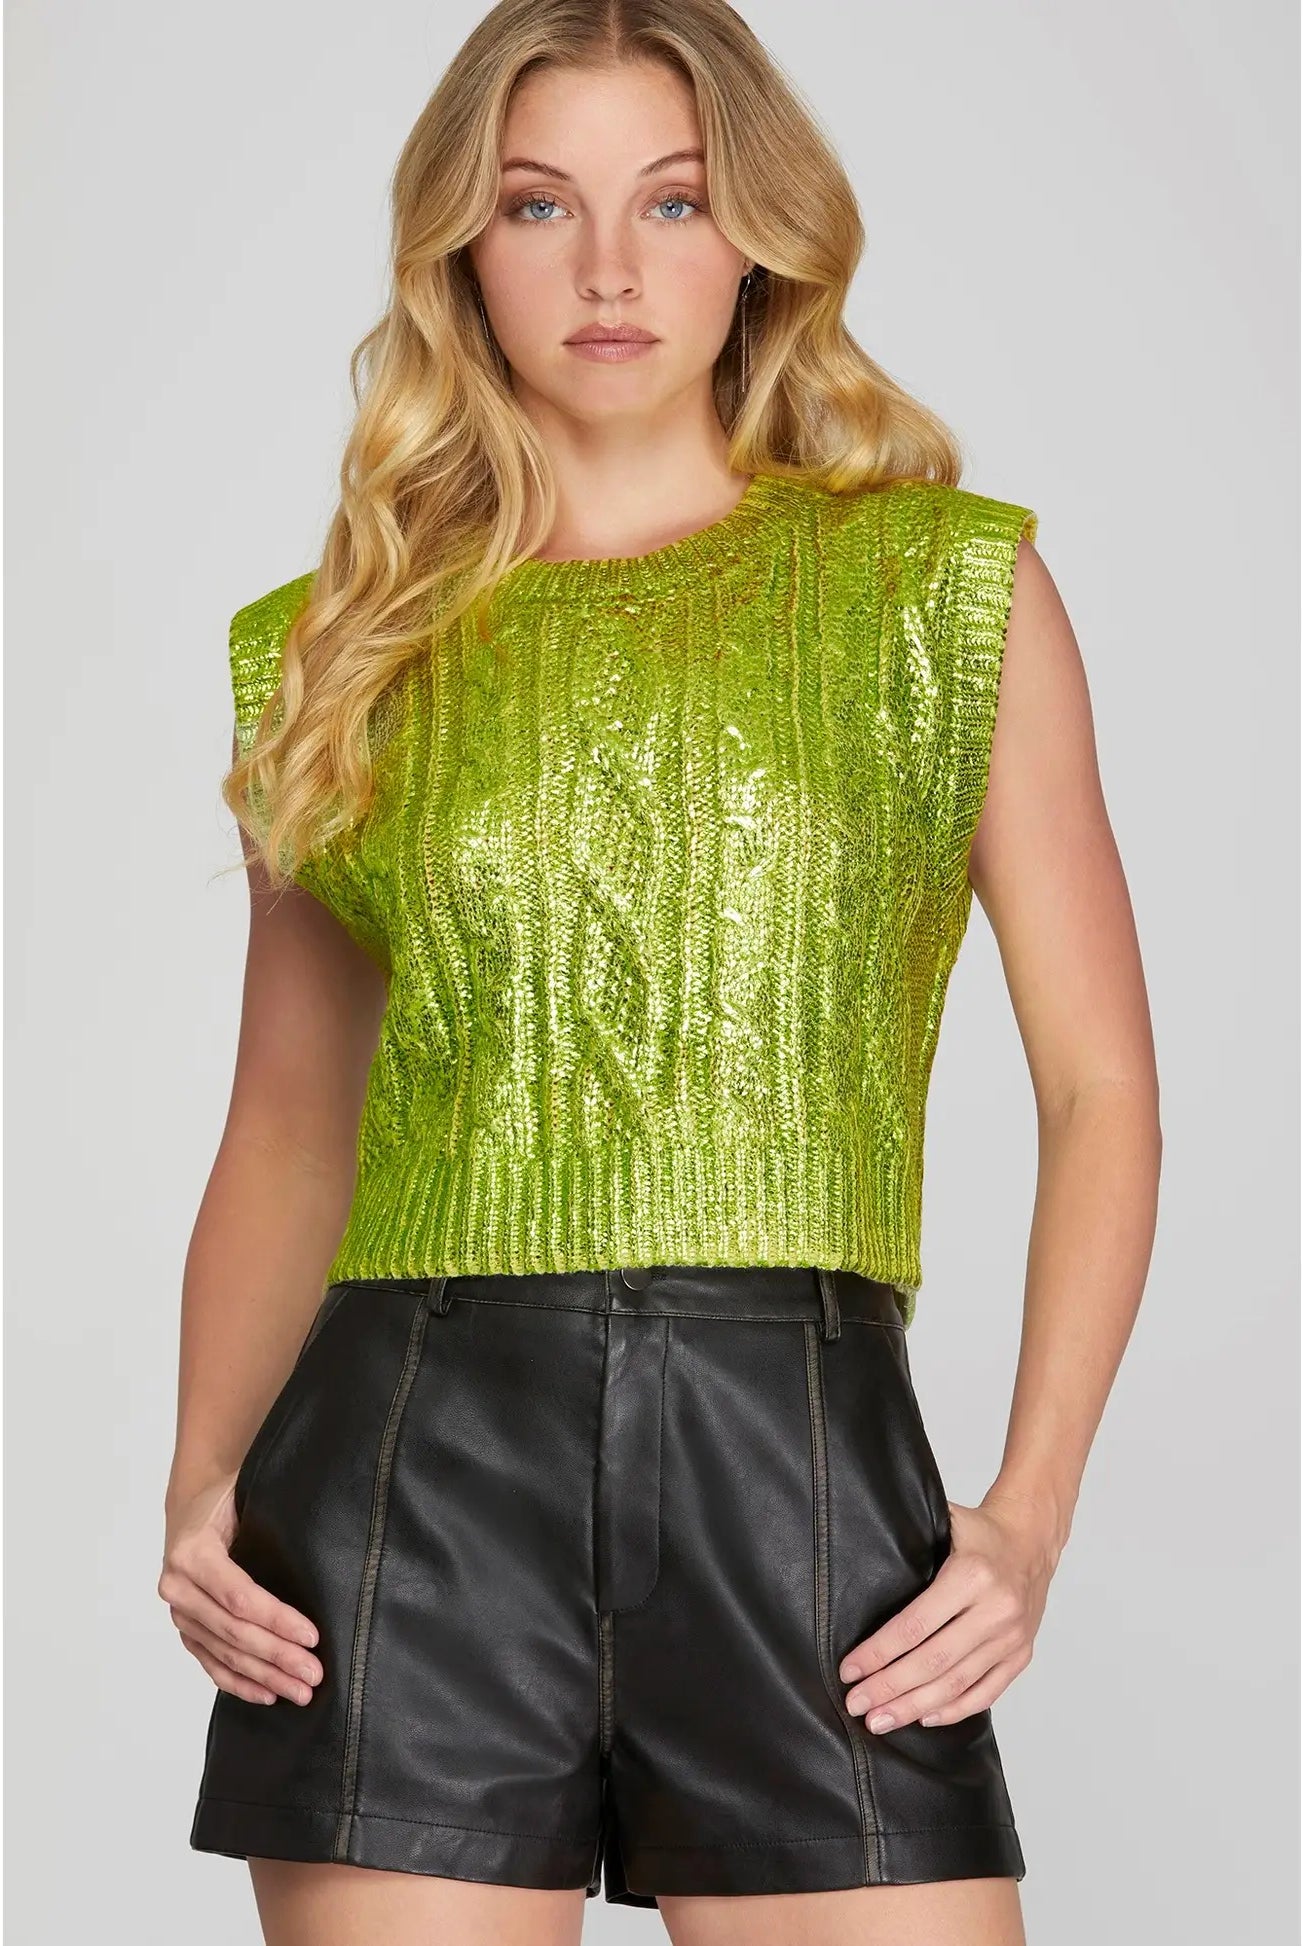 Cable Knit Metallic Green Sweater-Sweaters-Deadwood South Boutique & Company-Deadwood South Boutique, Women's Fashion Boutique in Henderson, TX